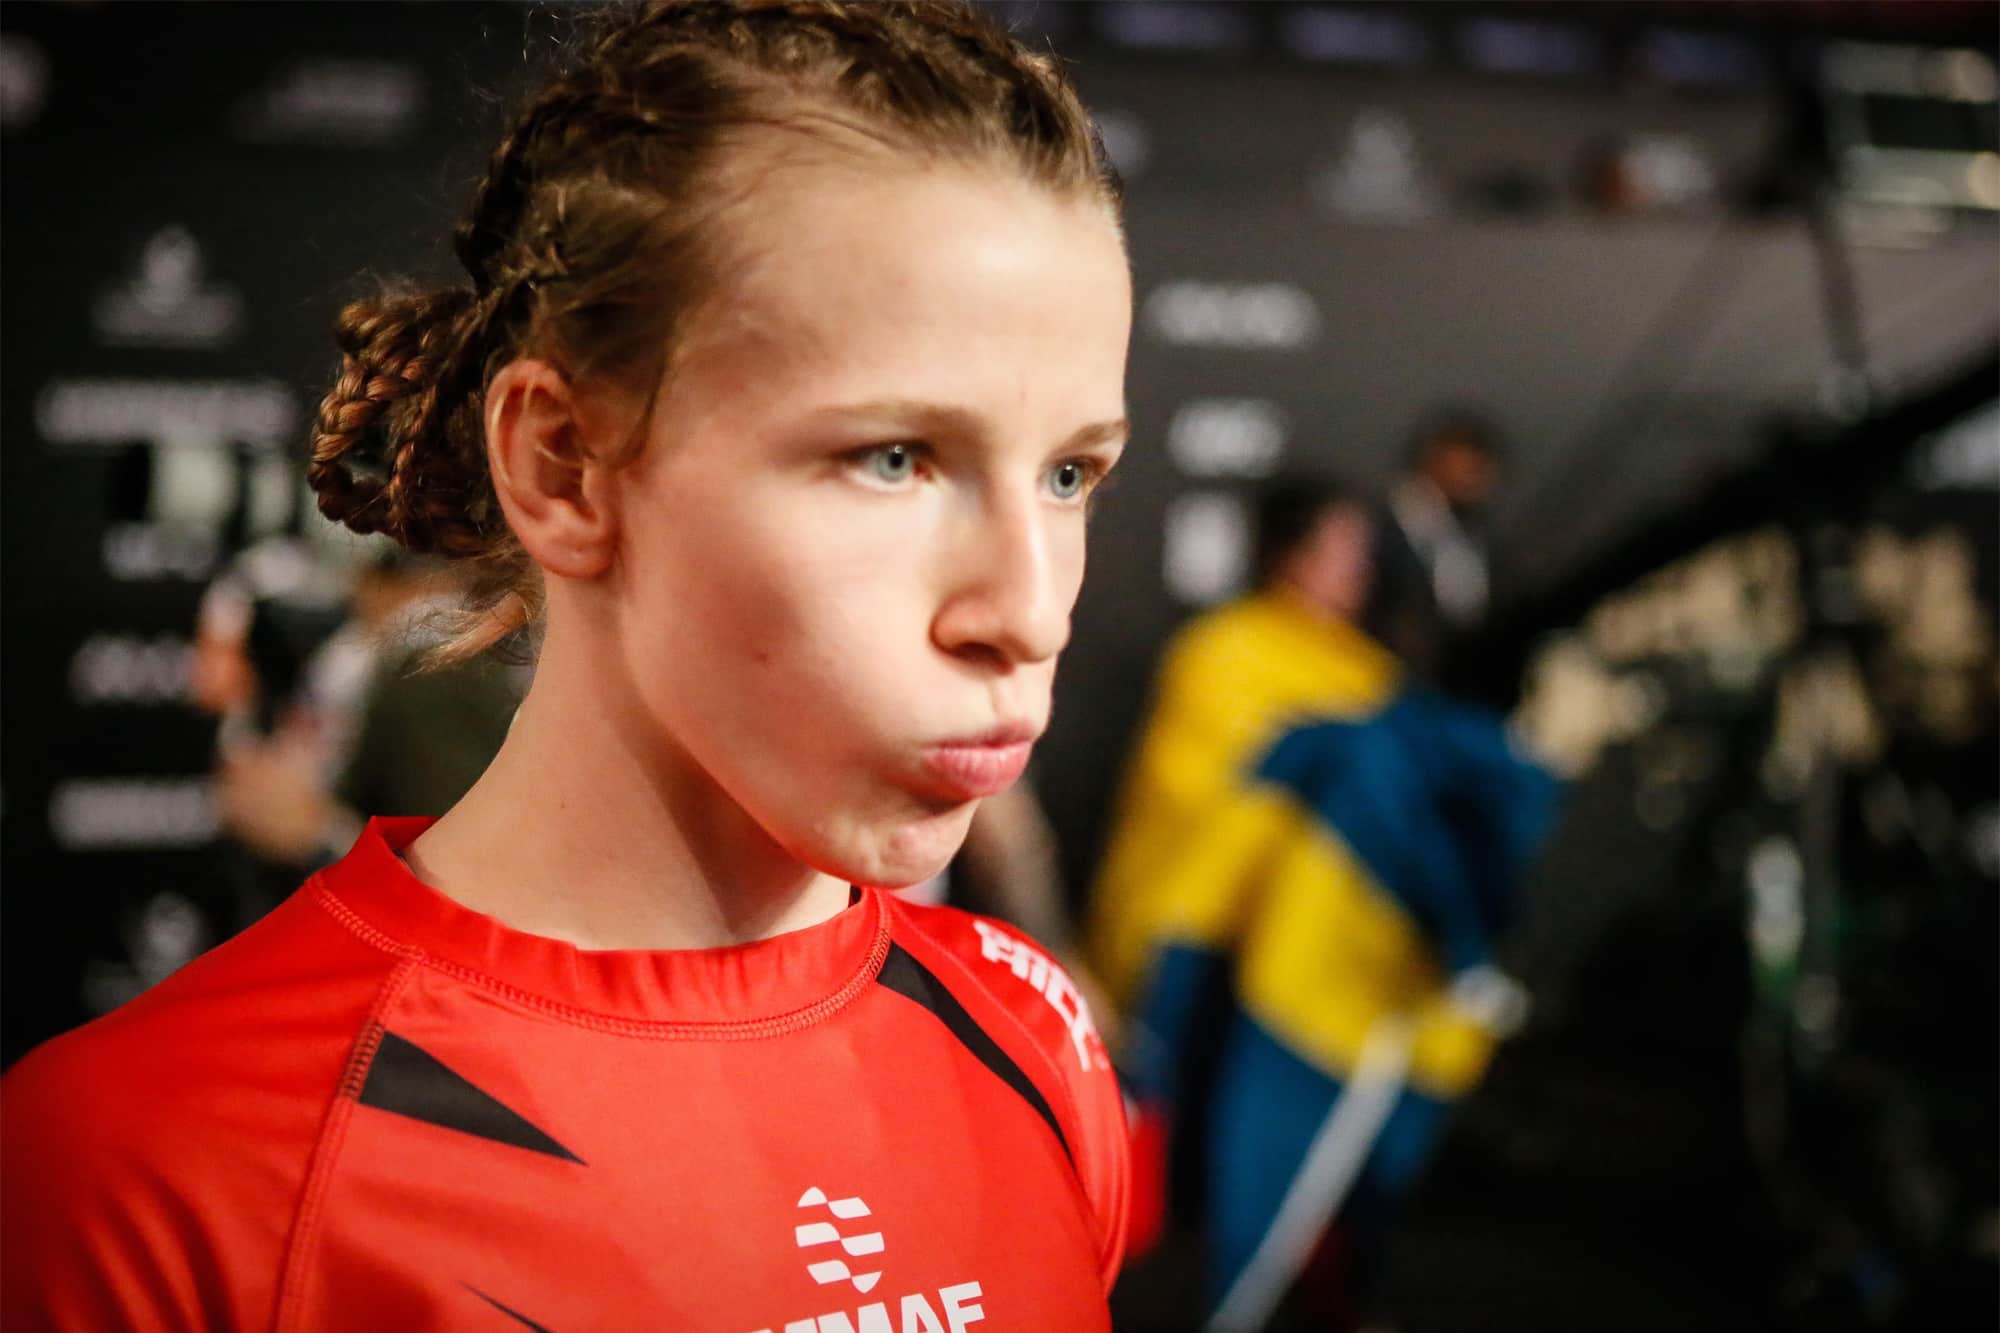 MMA Polska’s Third Set of Championships Adds Youth Divisions For The First Time